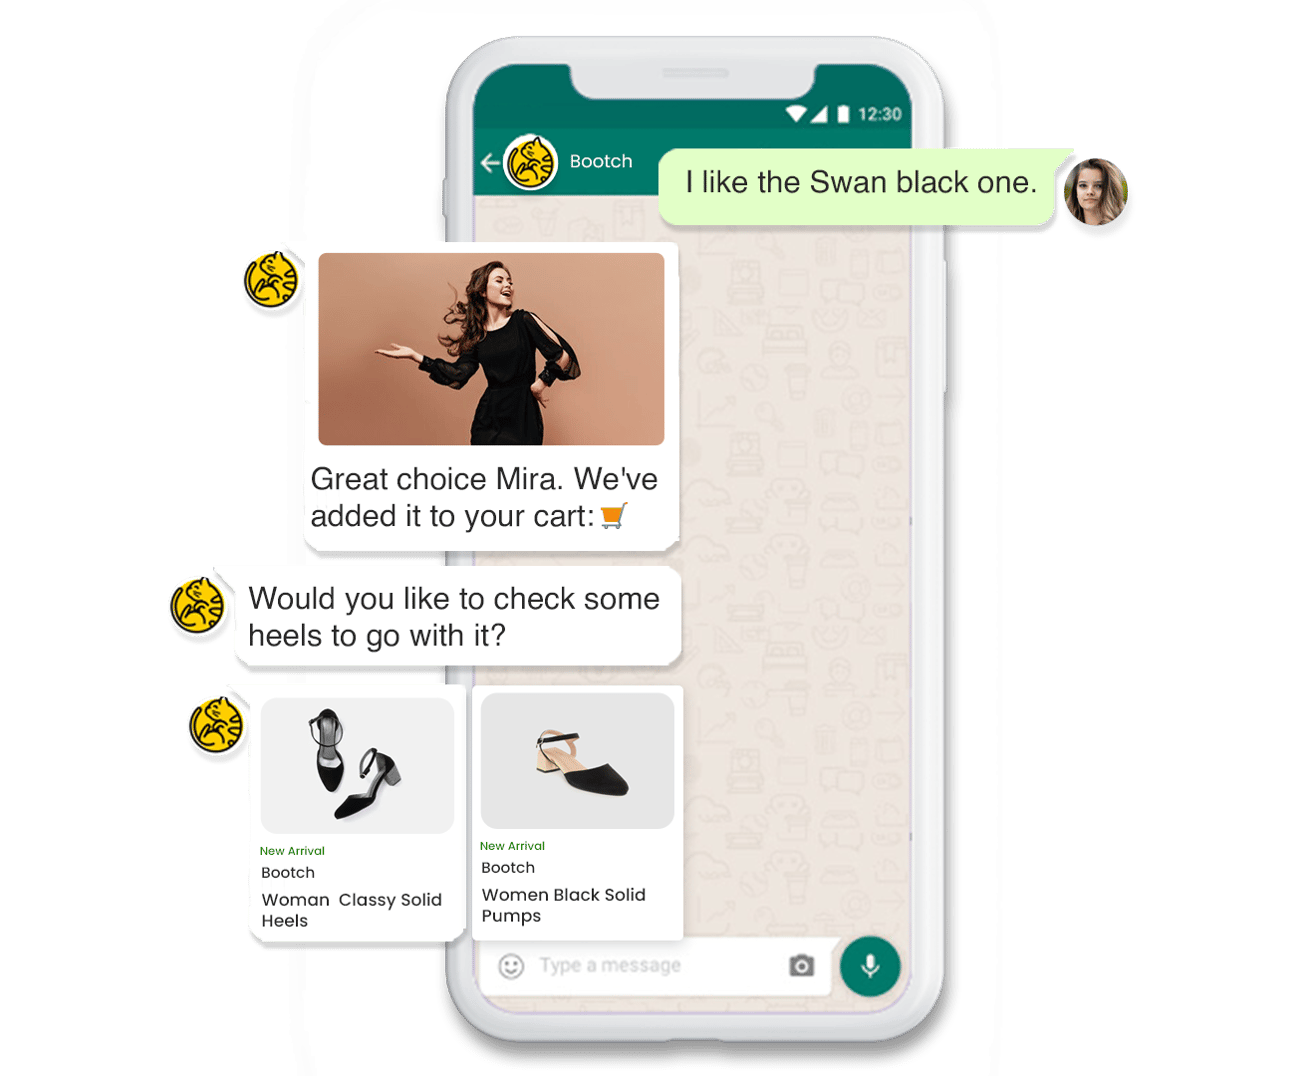 Product recommendations on WhatsApp